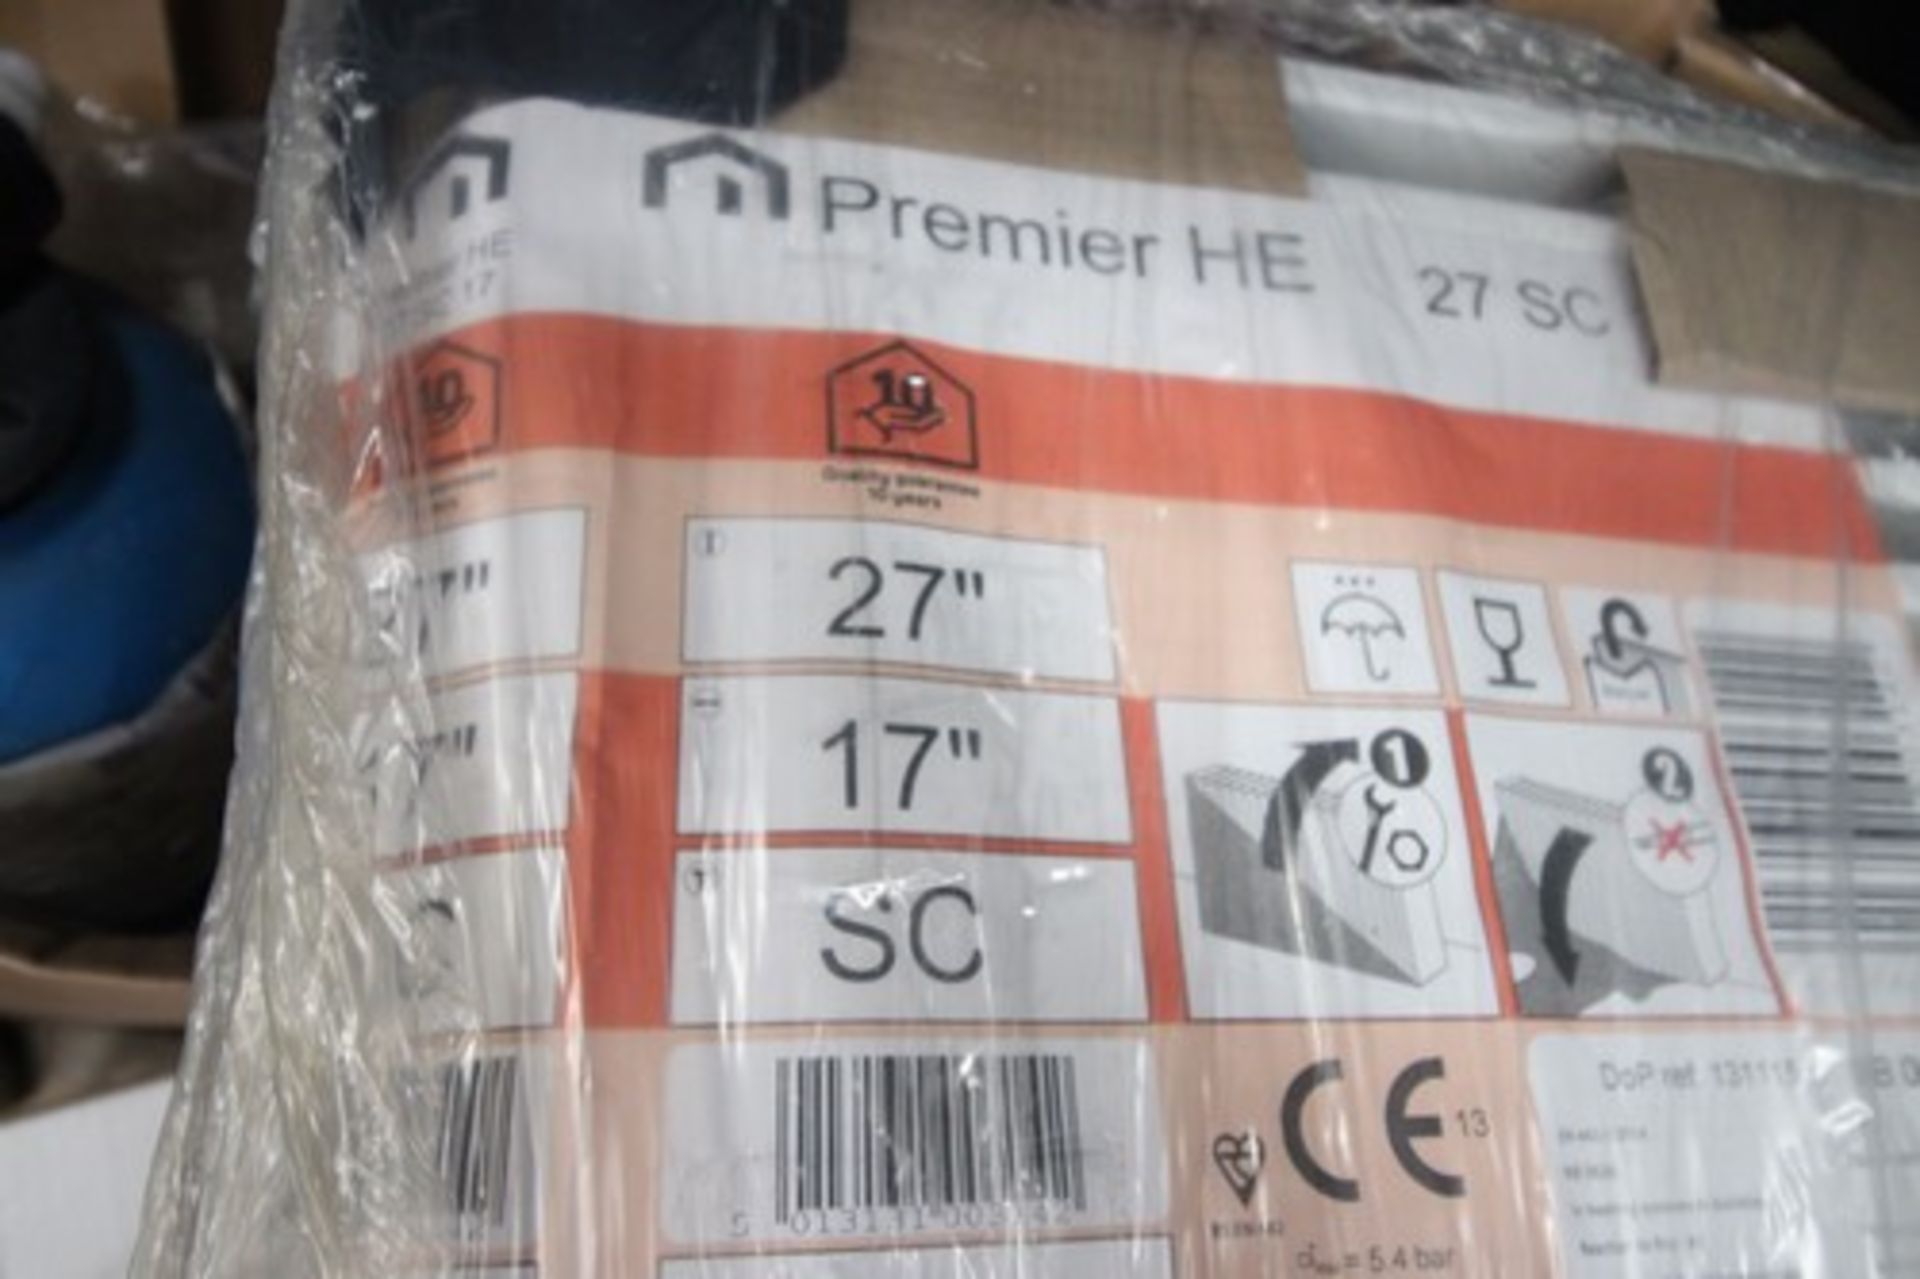 2 x Myson Premier HE 27" x 17" single radiators - Sealed new in pack (GS5) - Image 2 of 2